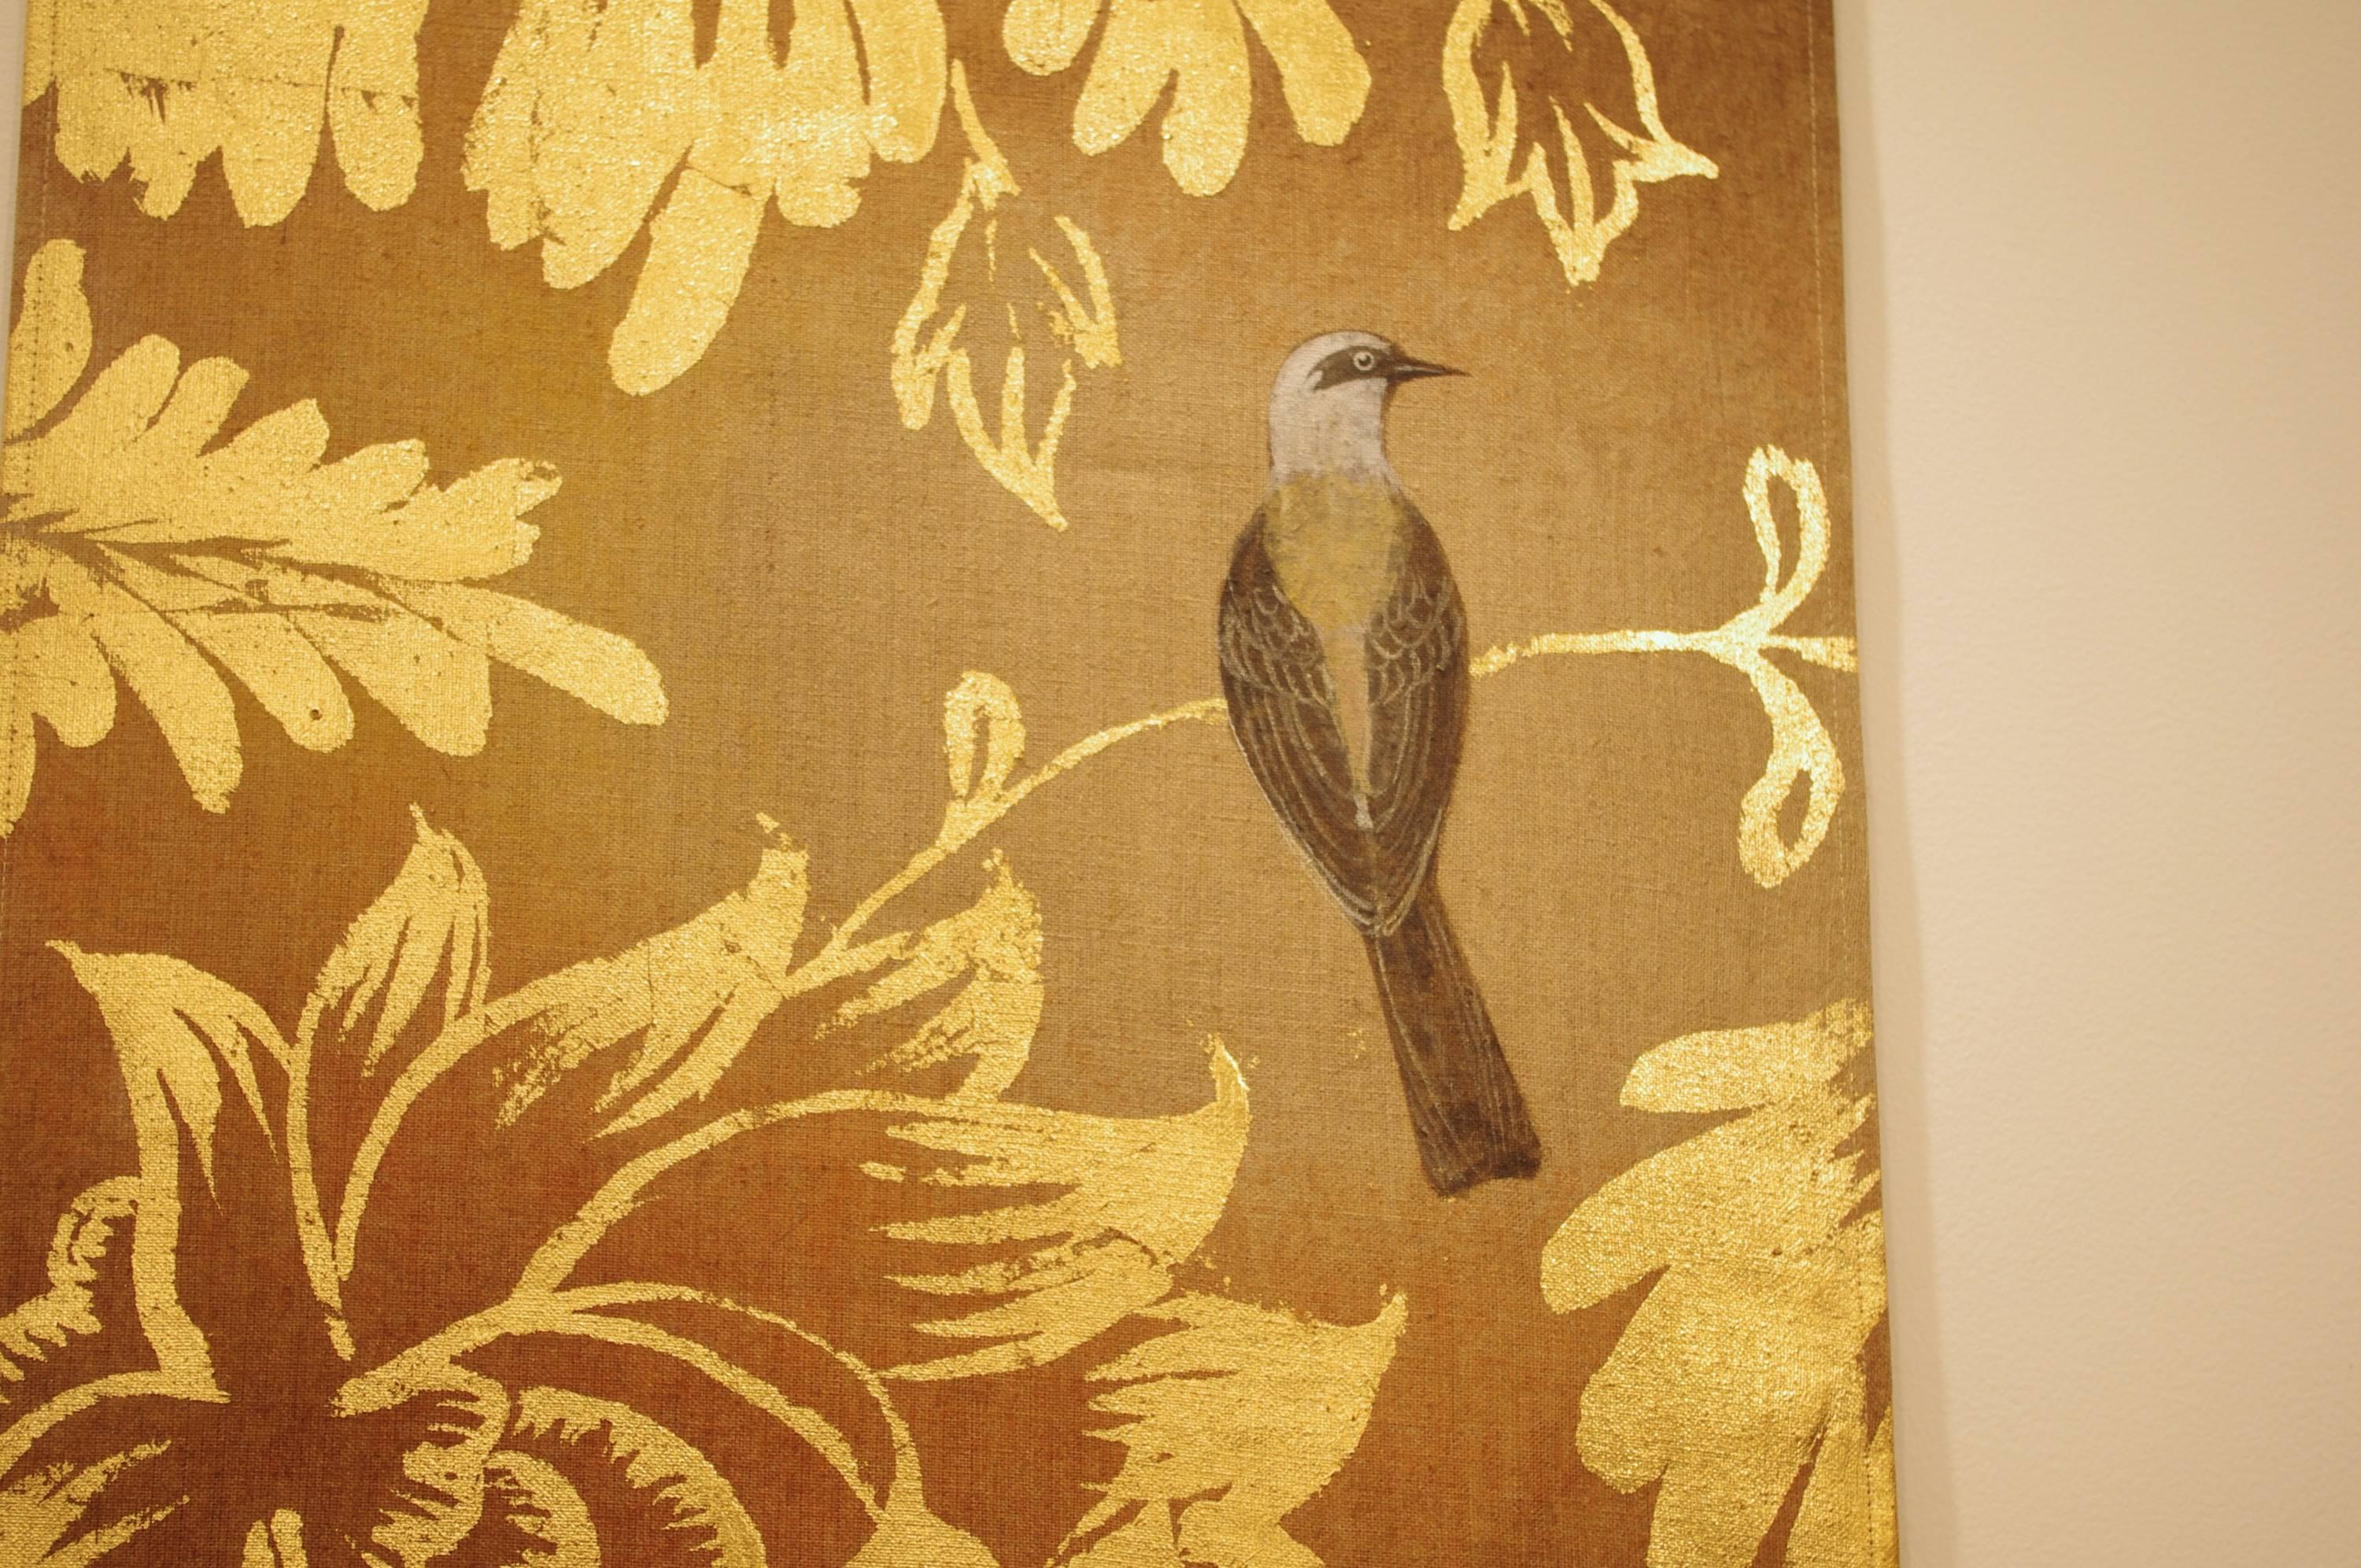 French artist.
Handmade.
Unique piece.
Contemporary art.
Chinoiserie style.
On linen with gilt decor.